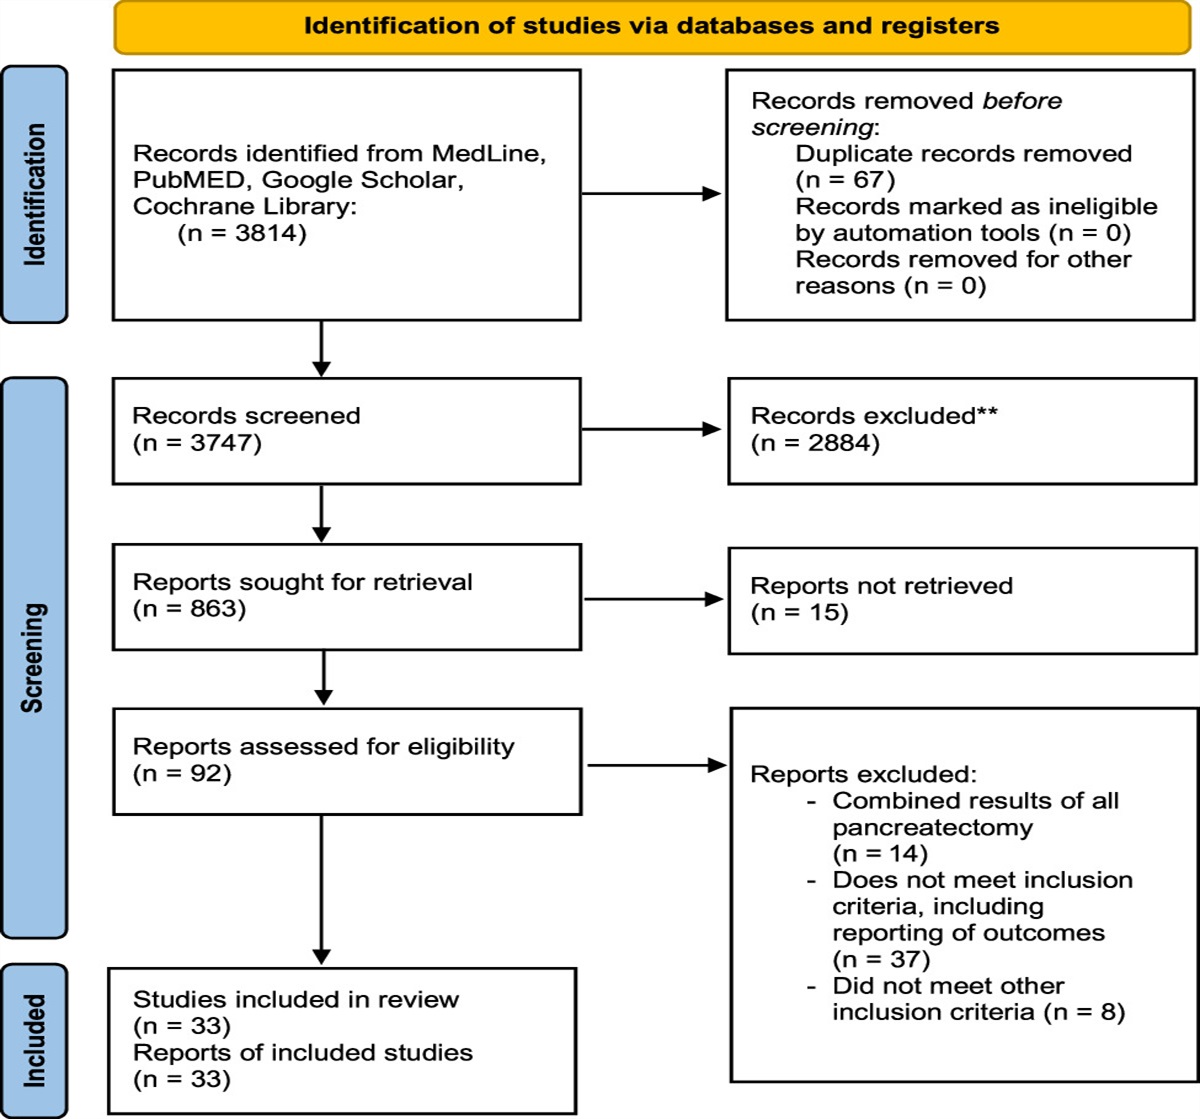 Centralization of Pancreaticoduodenectomy: A Systematic Review and Spline Regression Analysis to Recommend Minimum Volume for a Specialist Pancreas Service